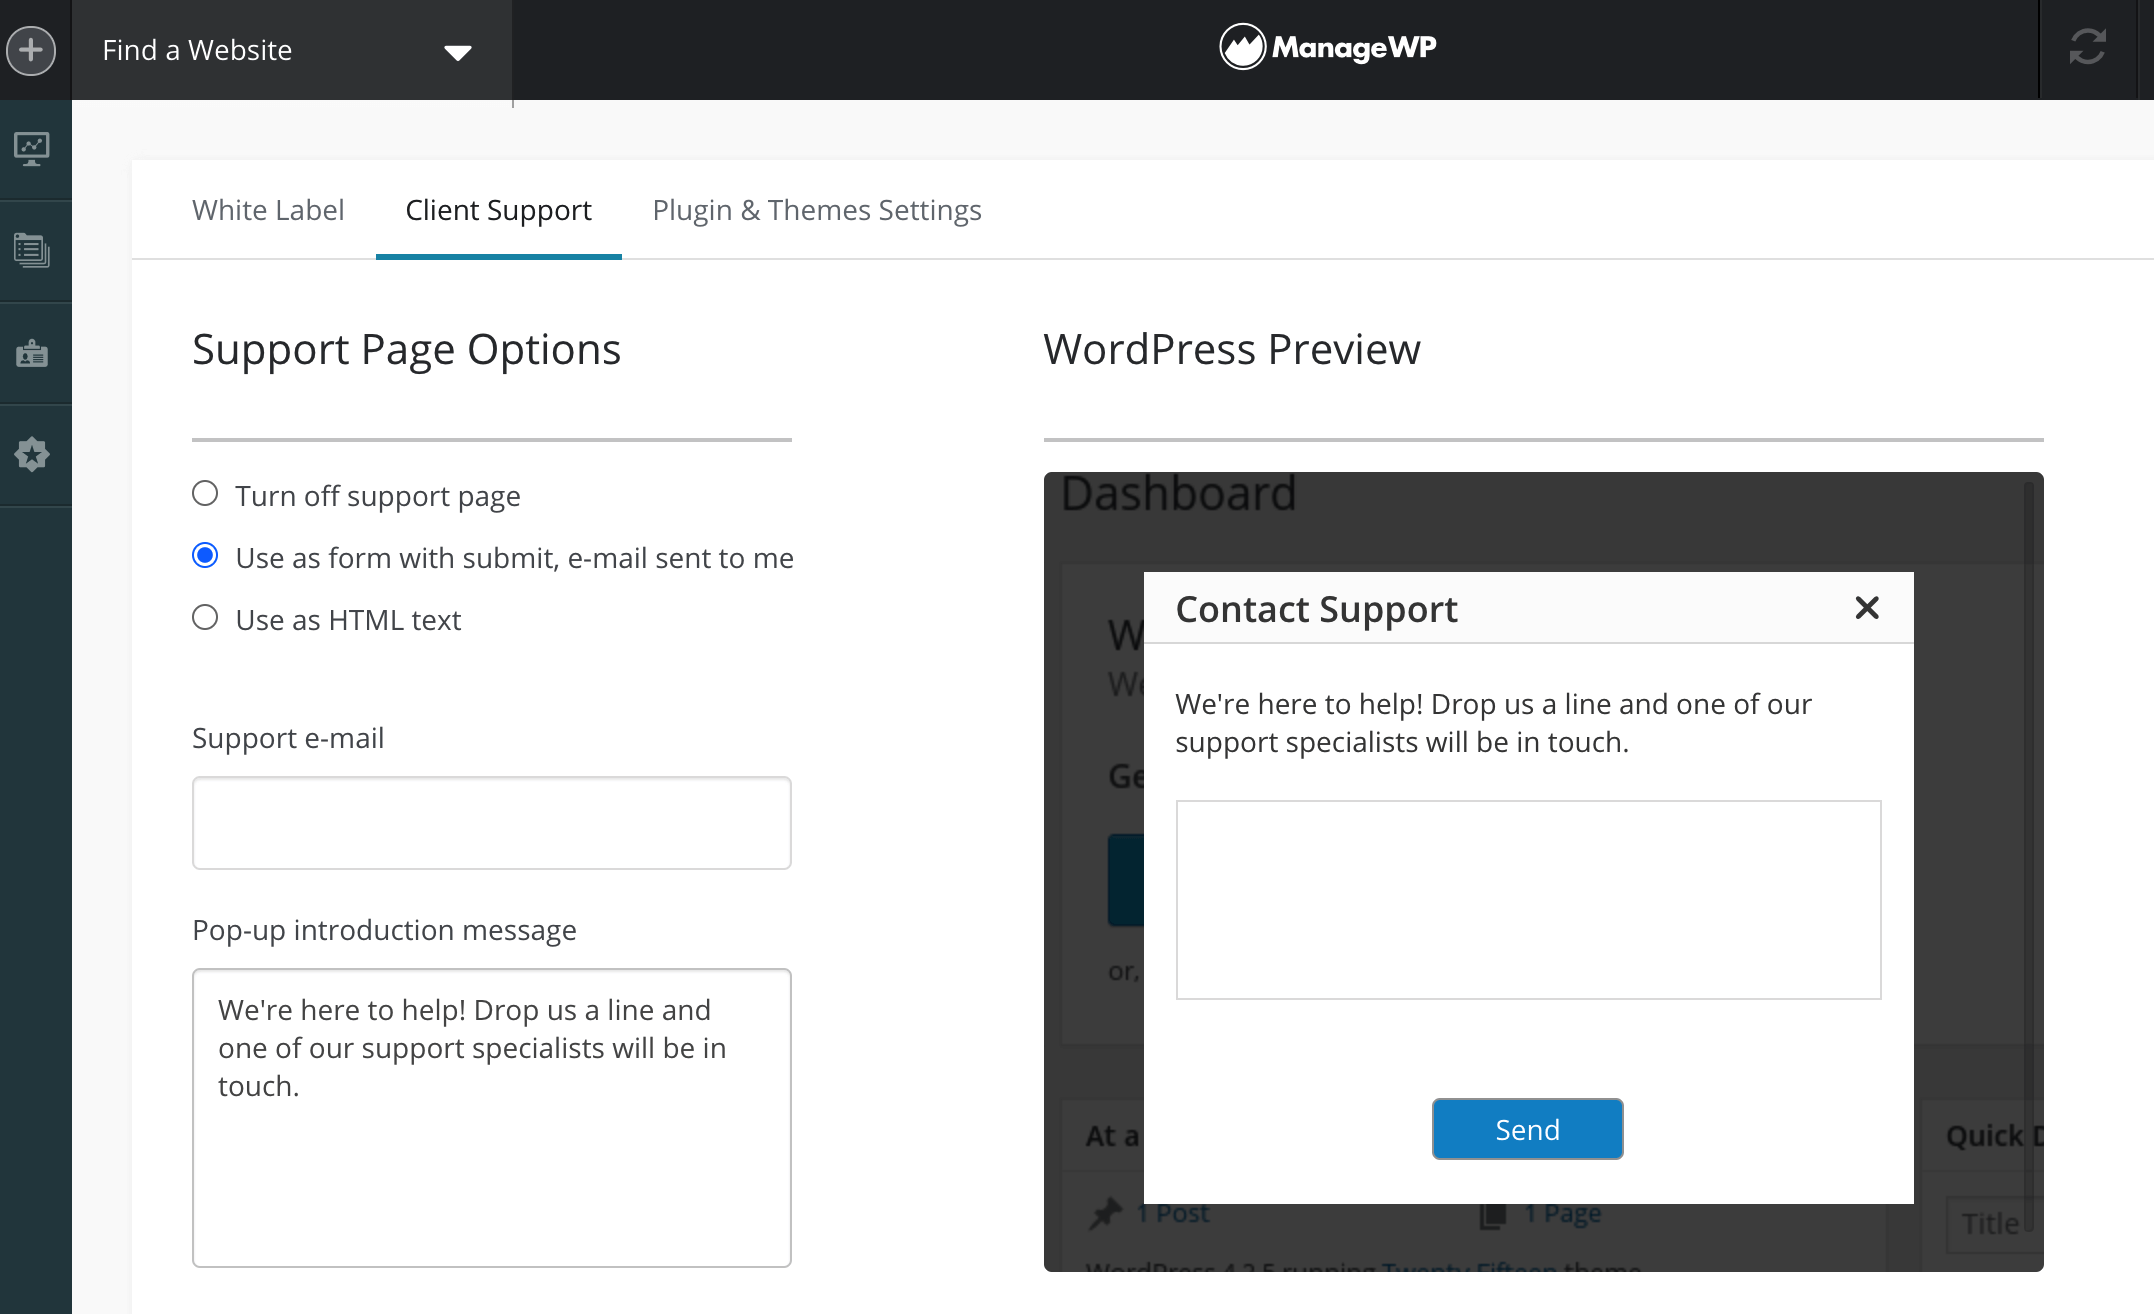 The ManageWP client support form settings.